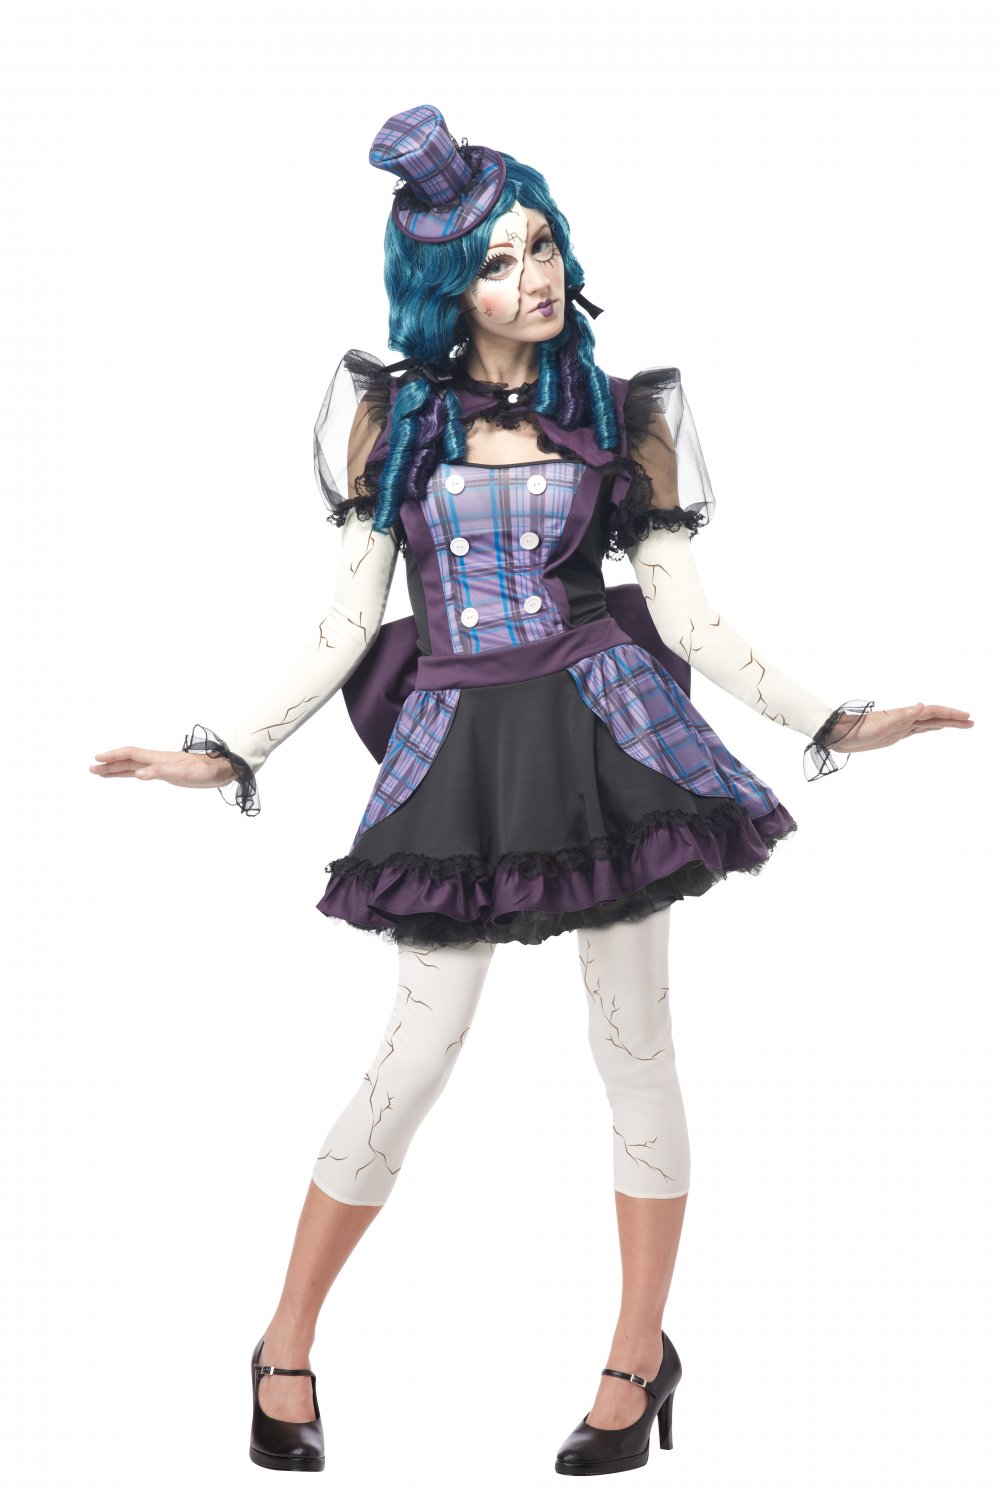 Plus Size: 1X #01374 Conjuring Broken Doll Monster High  Adult Costume